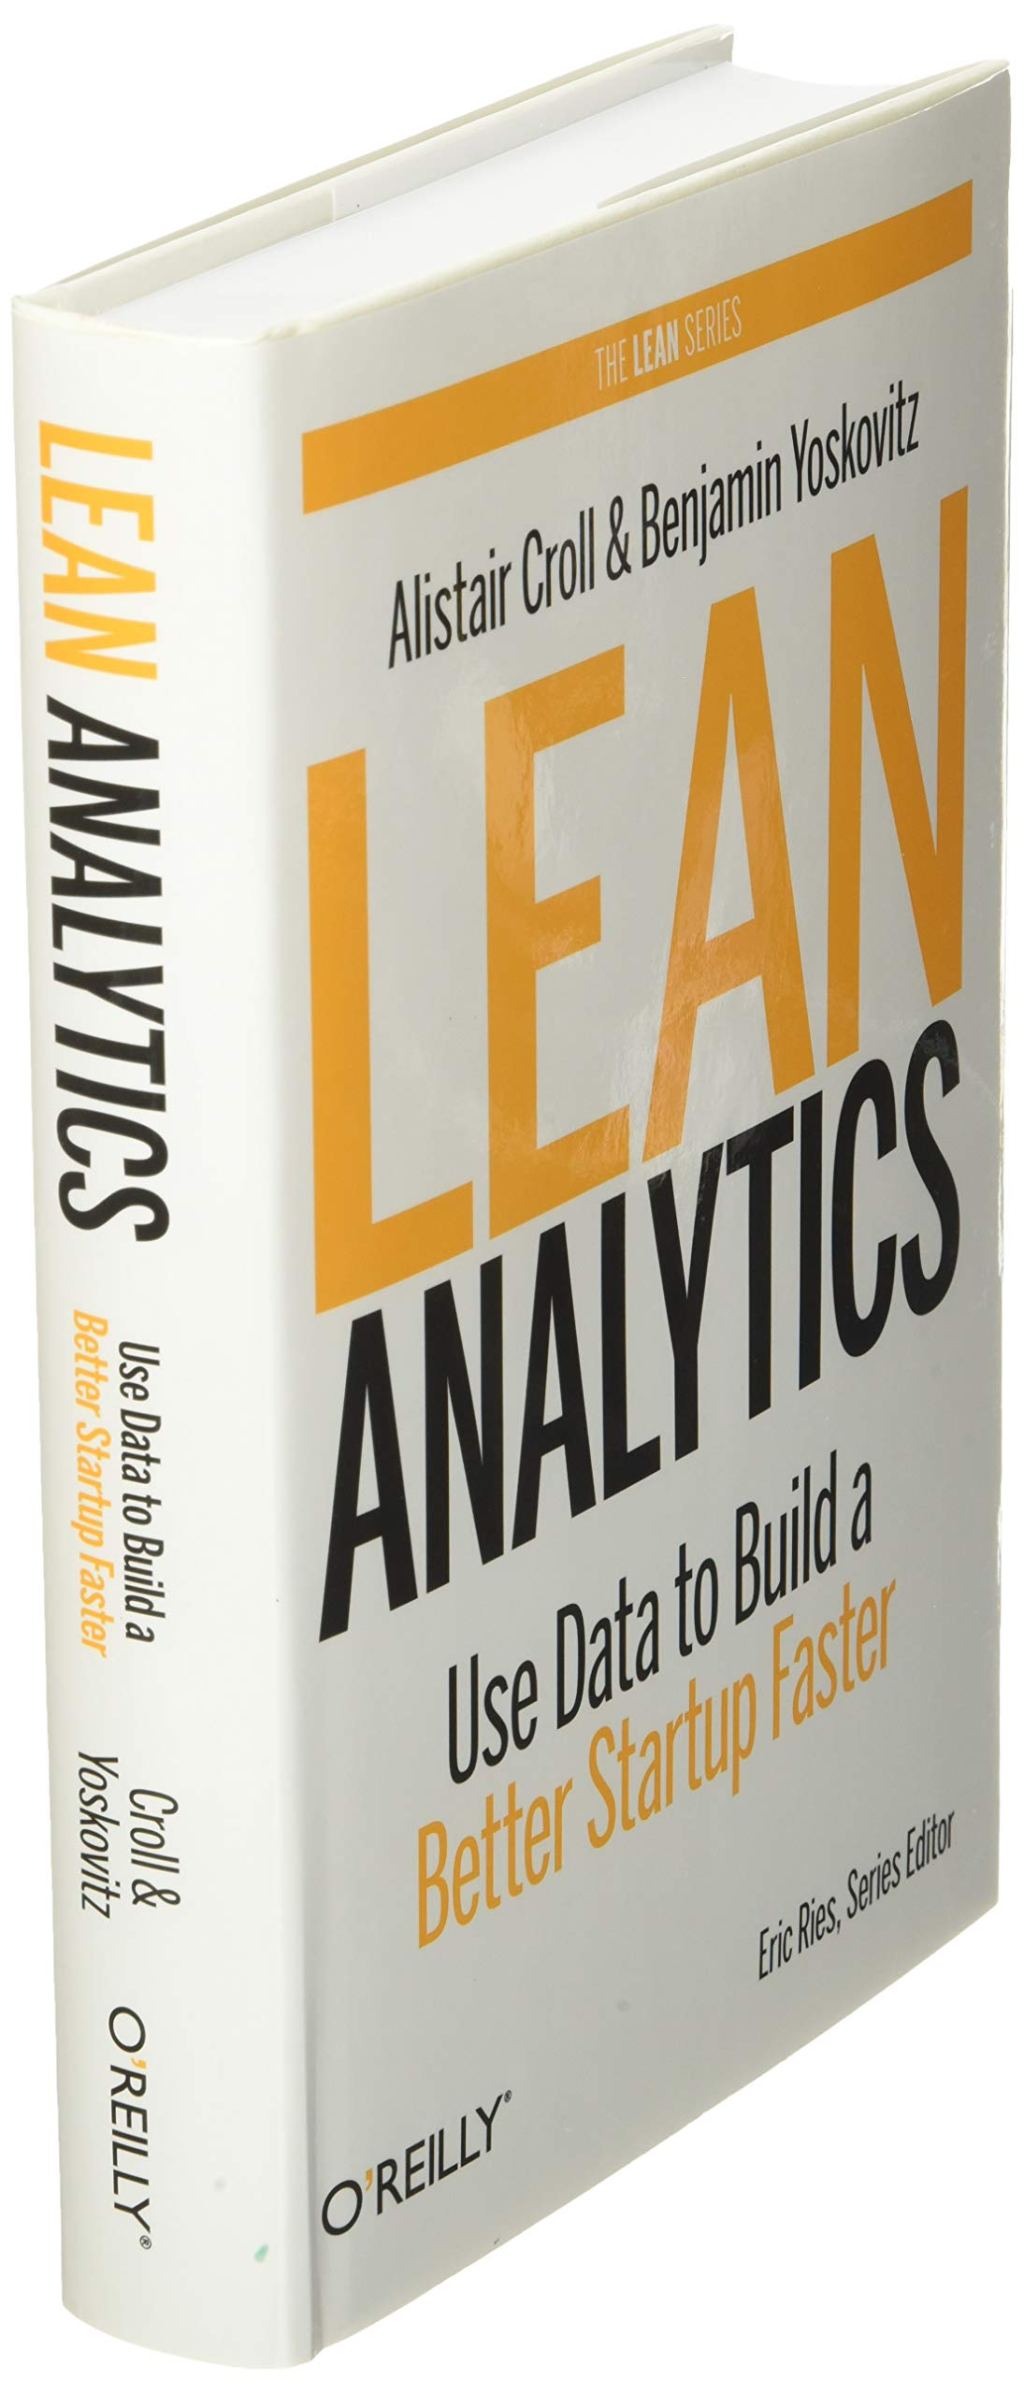 “Lean Analytics” (Book Review)